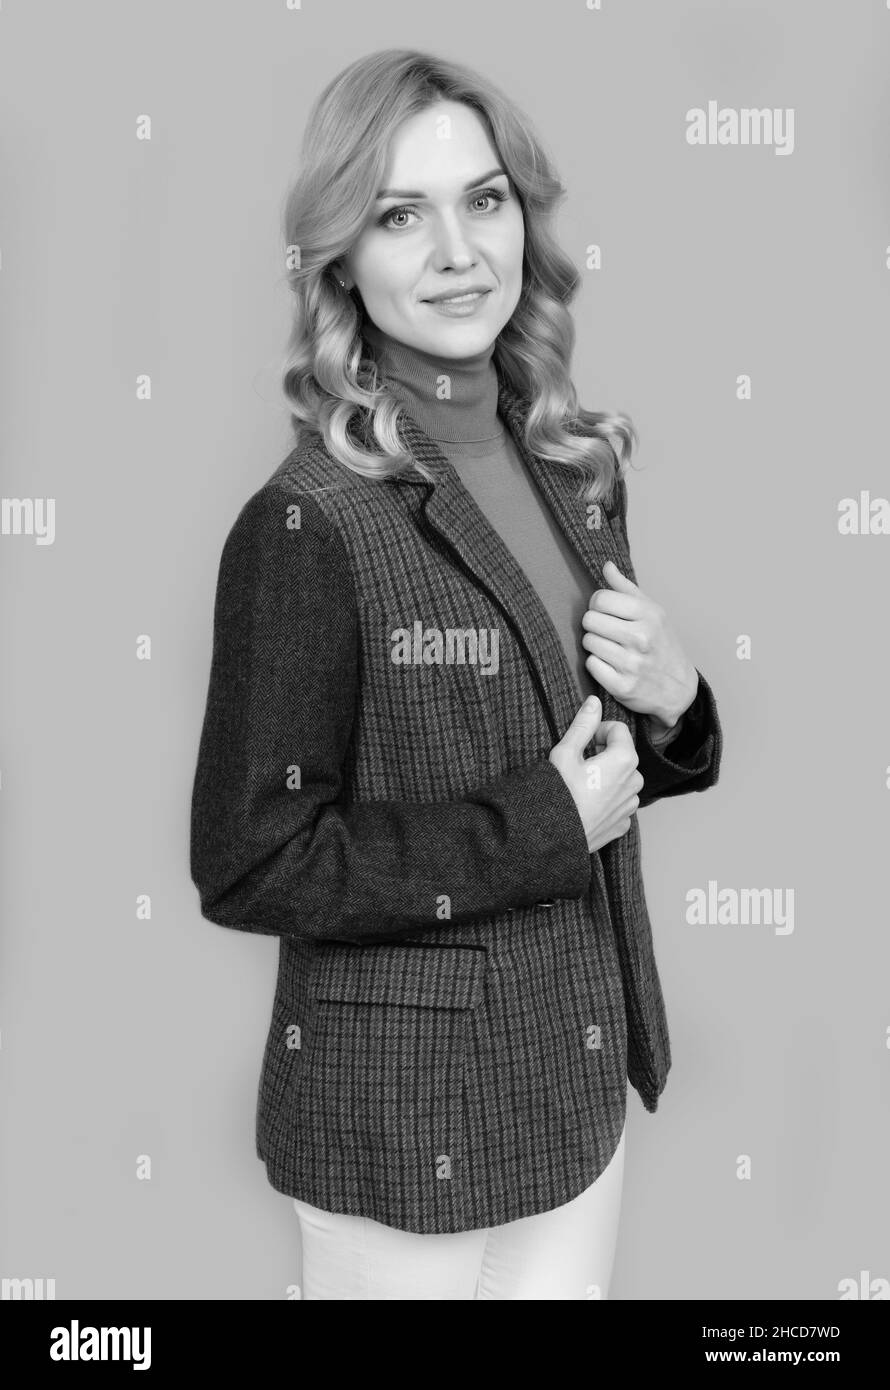 confident blonde woman in checkered english jacket, businesswoman Stock Photo